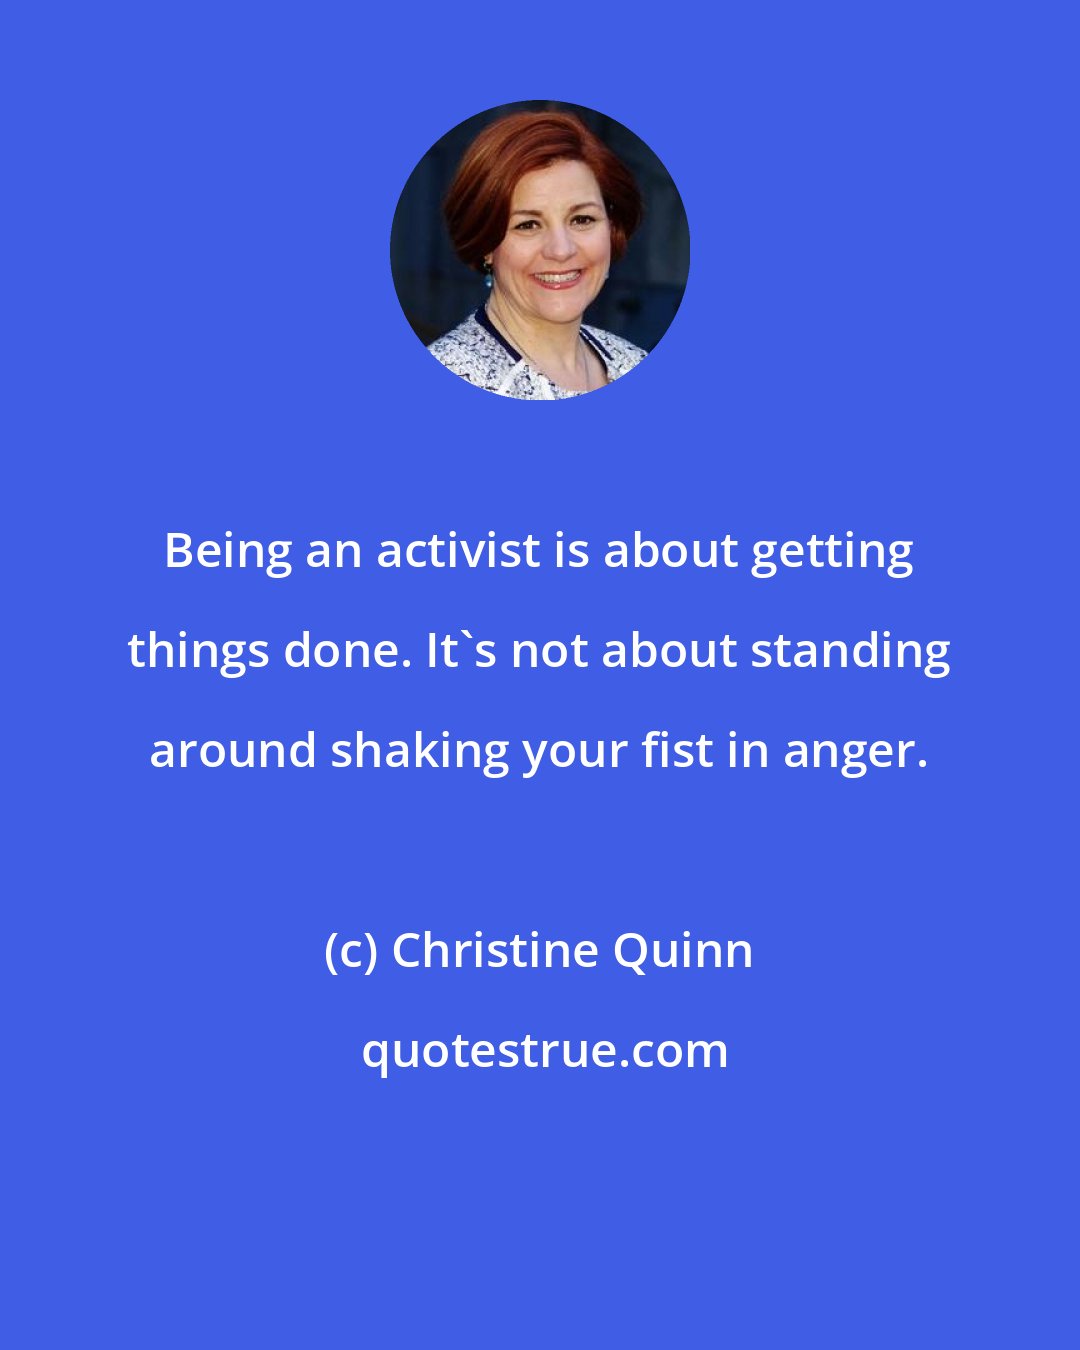 Christine Quinn: Being an activist is about getting things done. It's not about standing around shaking your fist in anger.